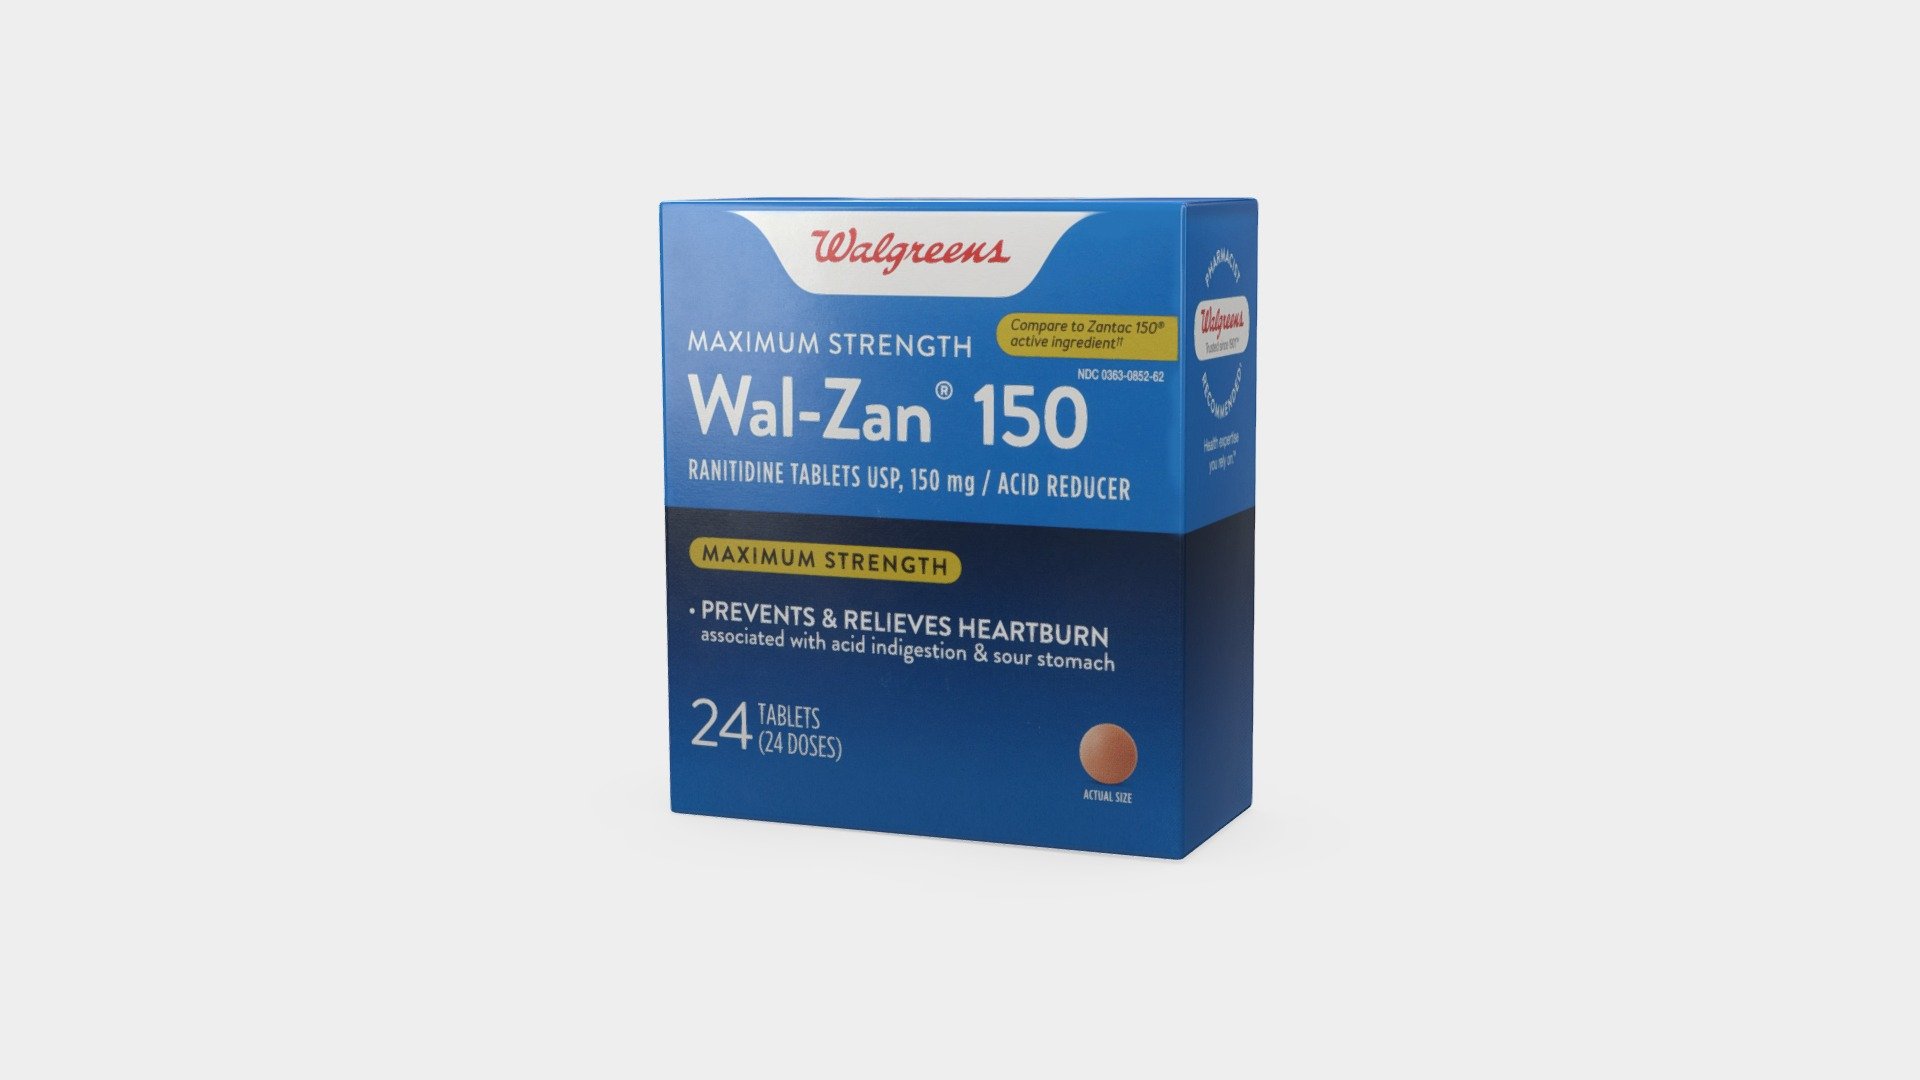 Walgreens Wal Zan 150 model
VR and game ready for high quality Architectural Visualization
0311917202907 - Walgreens Wal Zan 150 - 3D model by Invrsion 3d model